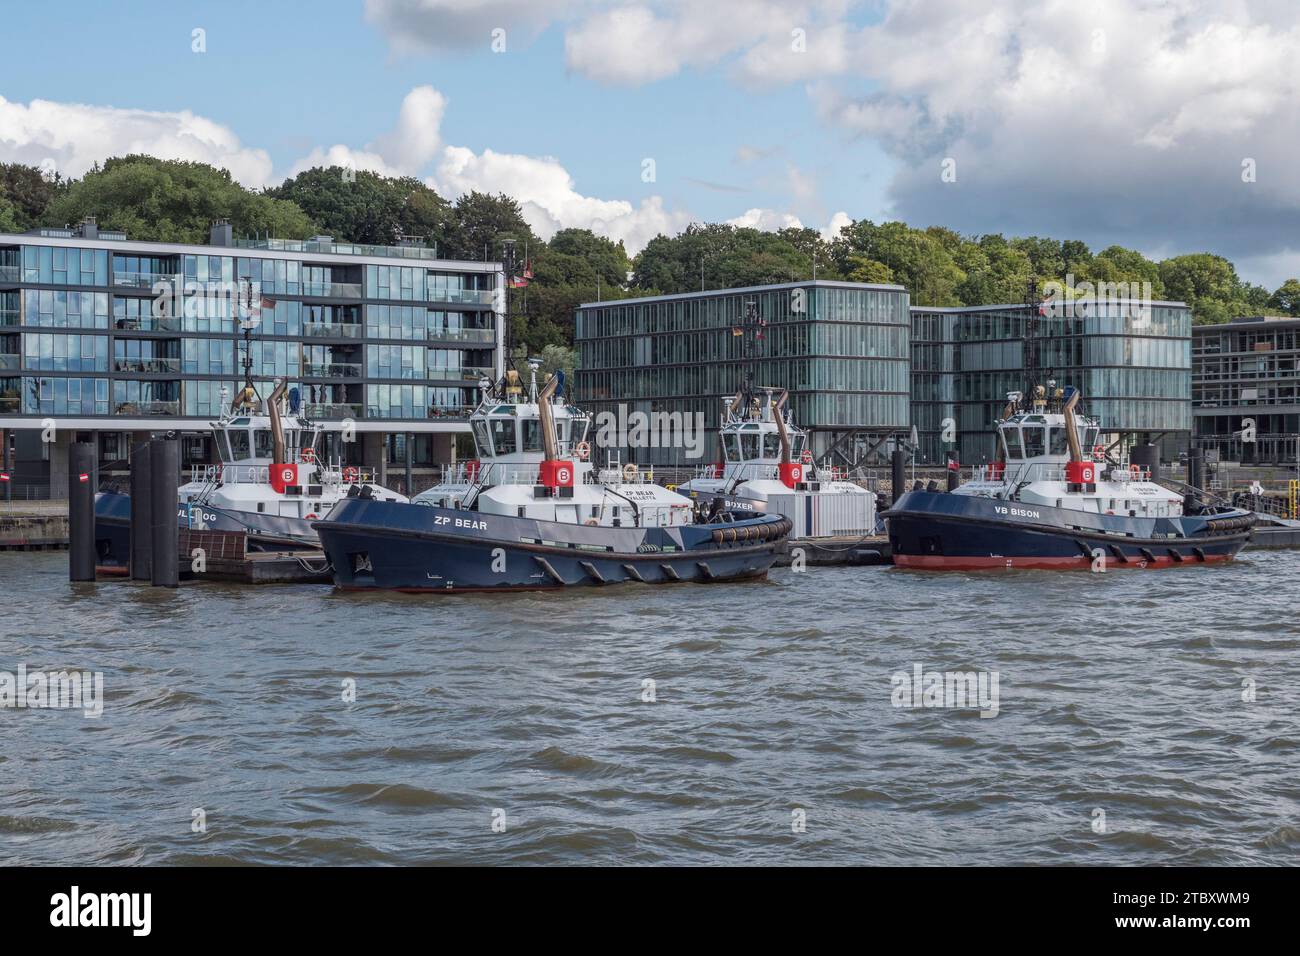 Port of Hamburg inland tug boats on the River Elbe viewed from the 62 HADAG ferry in Hamburg, Germany. Stock Photo